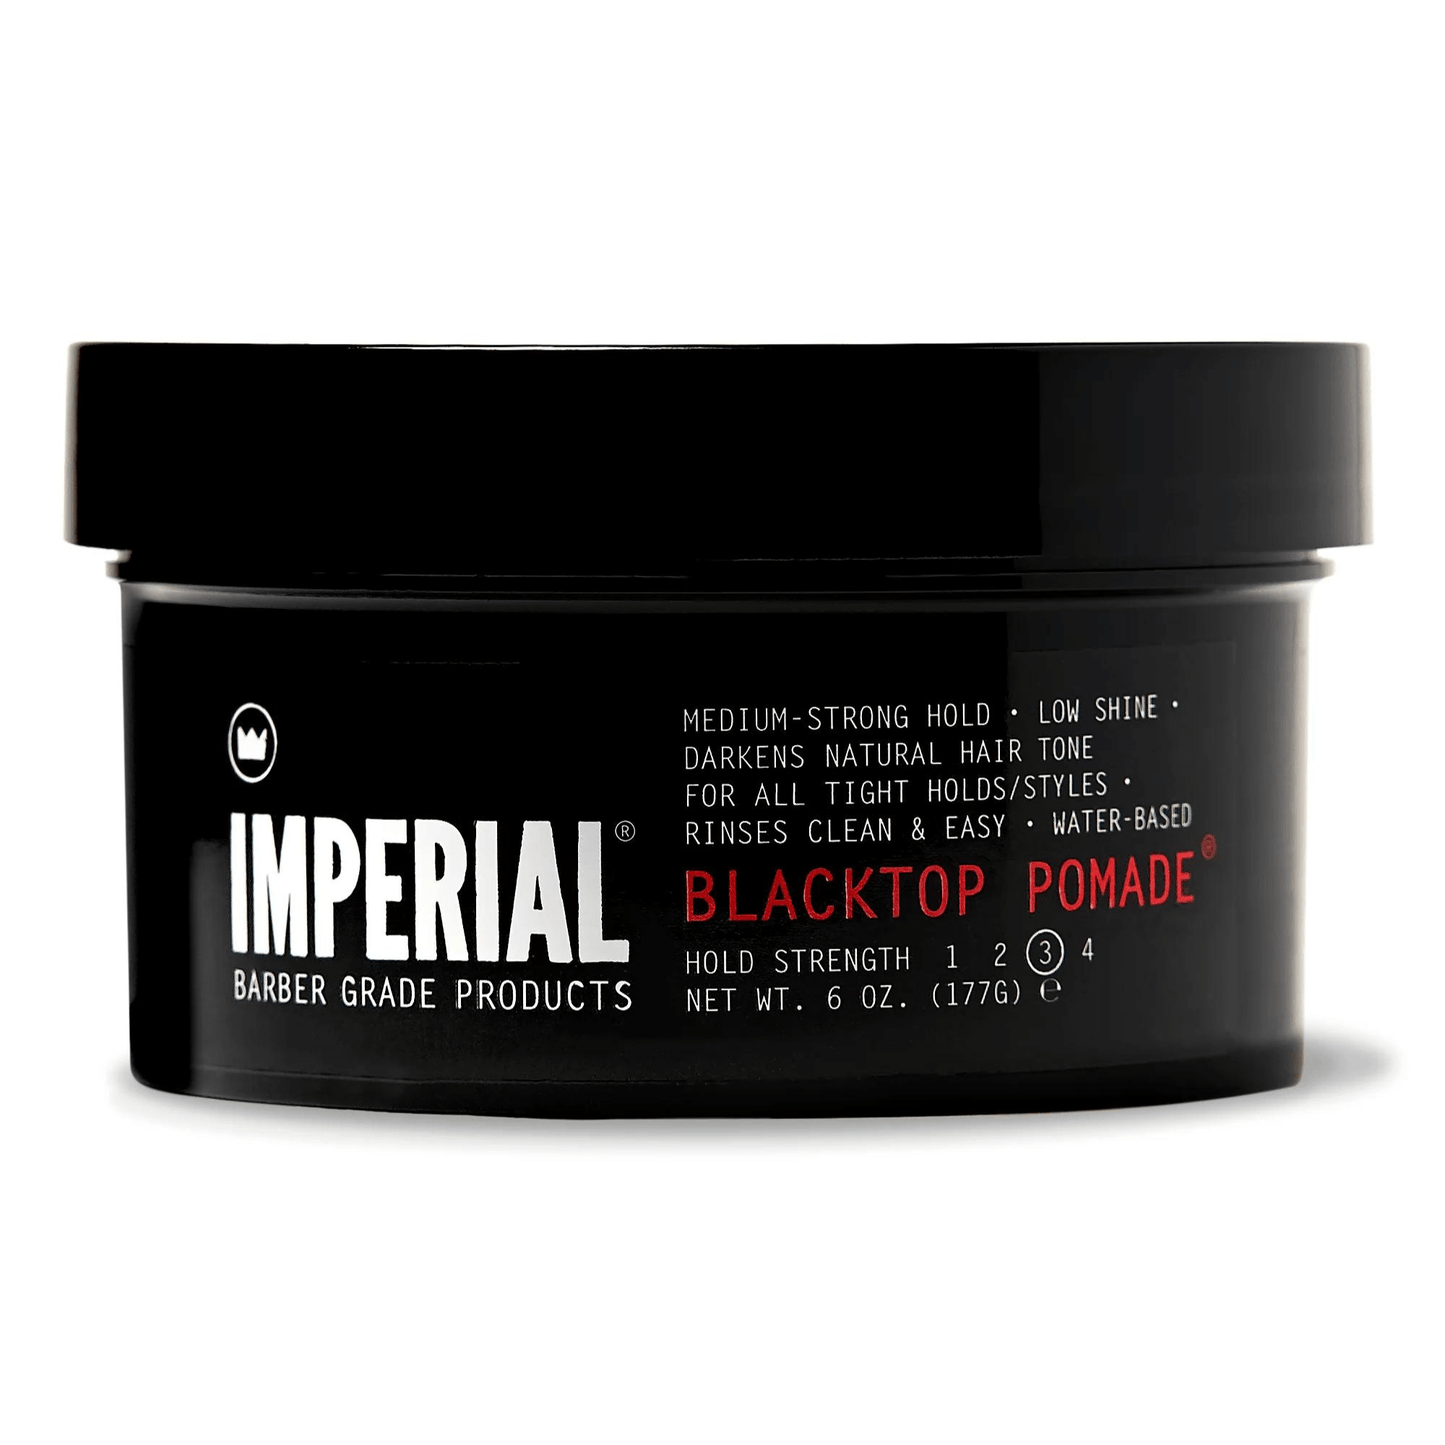 Primary Image of Blacktop Pomade